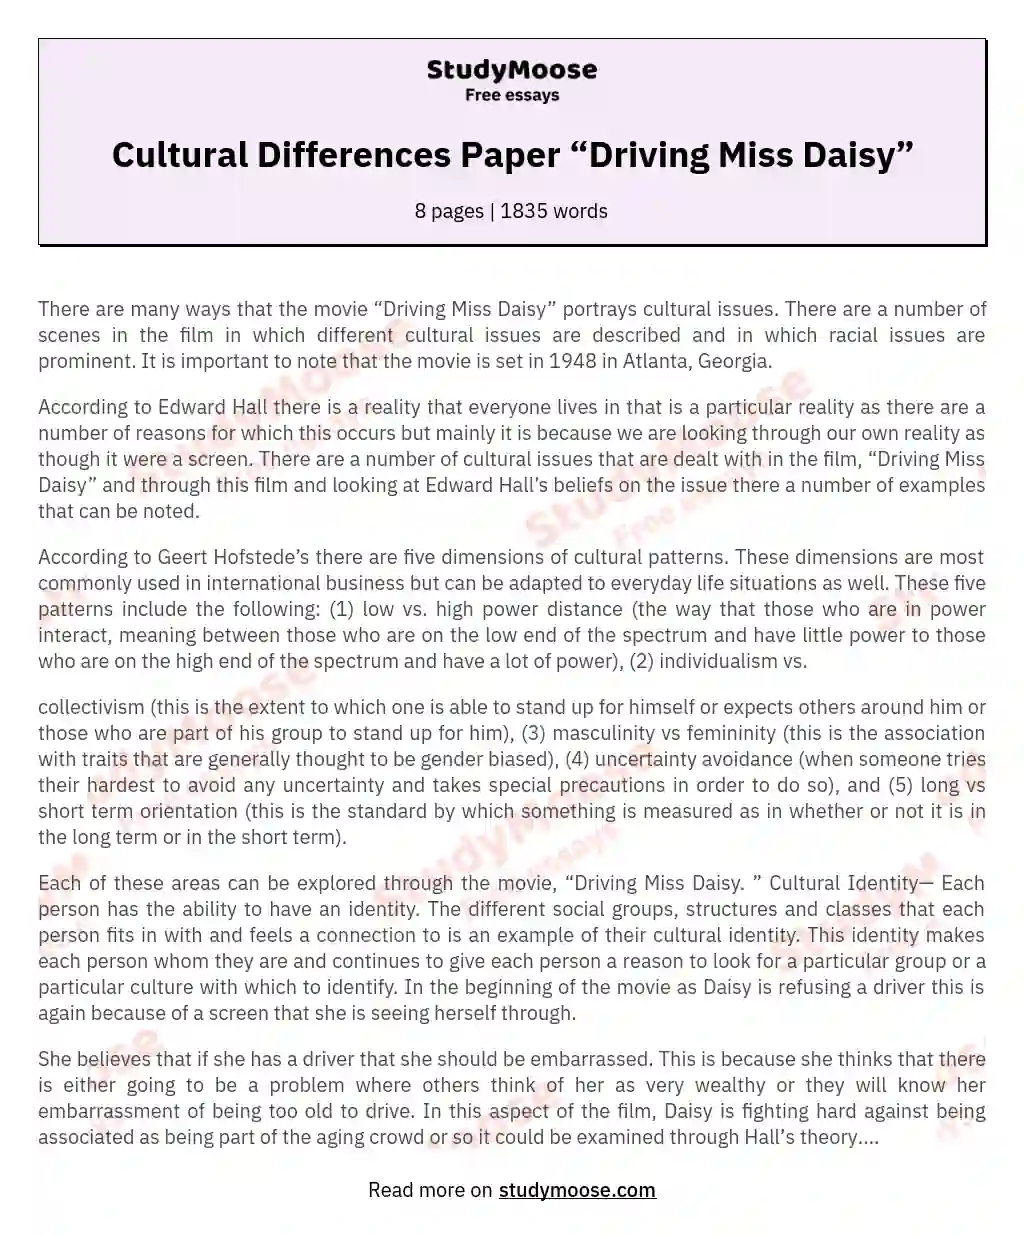 Cultural Differences Paper “Driving Miss Daisy” essay